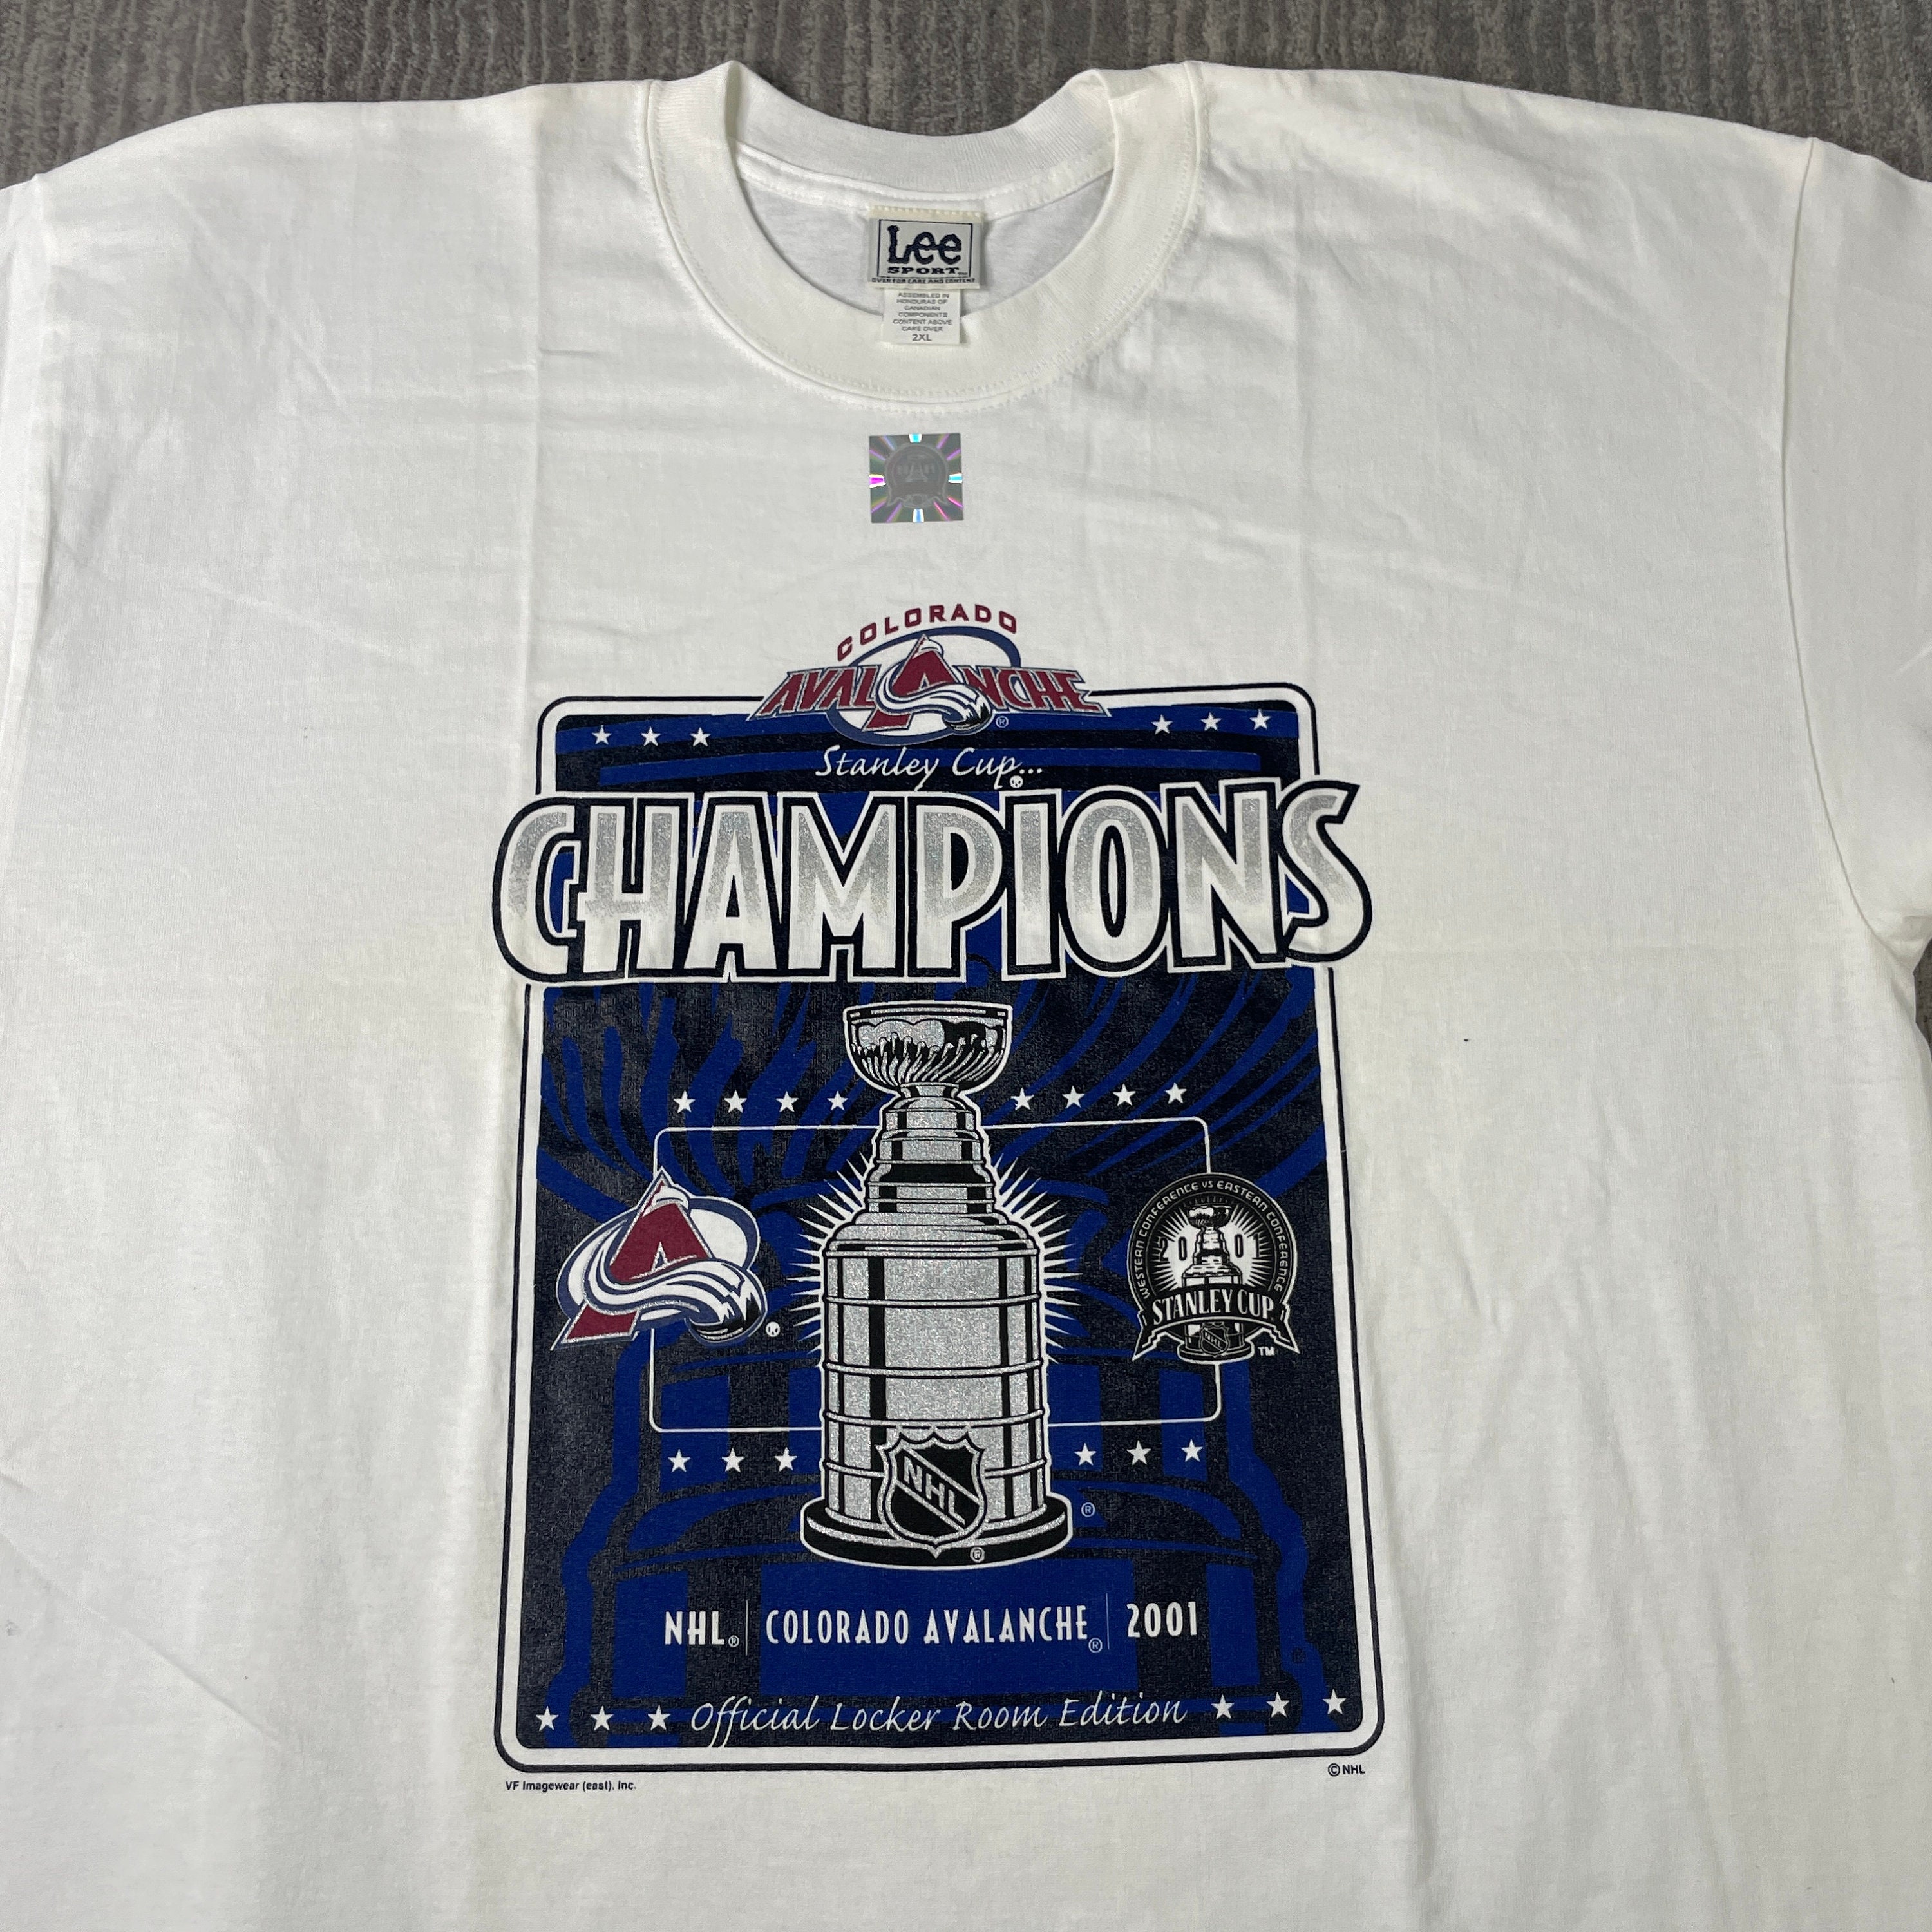 Colorado Avalanche Stanley Cup Champions featuring shirts and